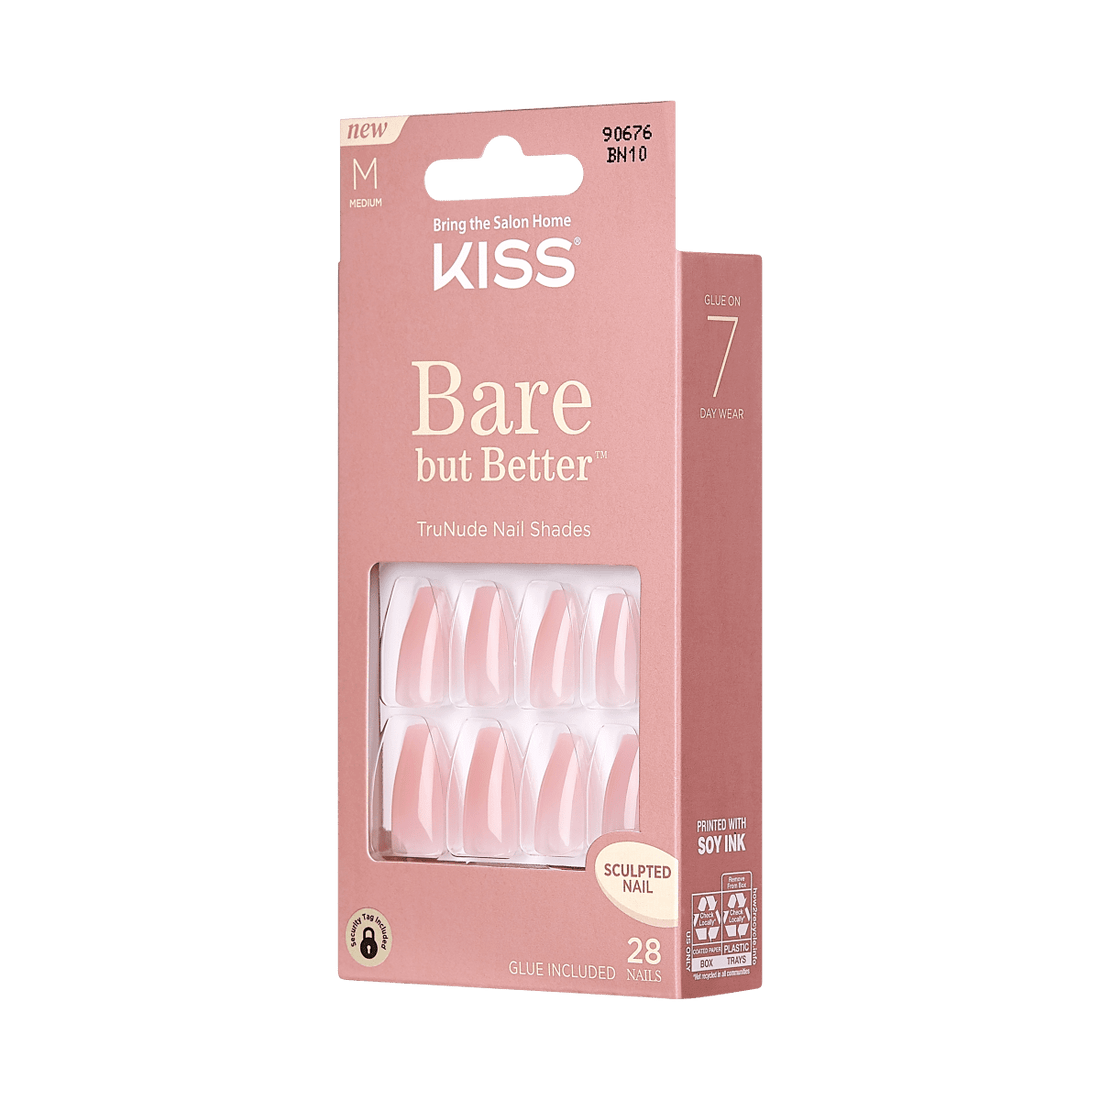 KISS Bare But Better, Press-On Nails, Bare Nude, Nude, Med Coffin, 28ct